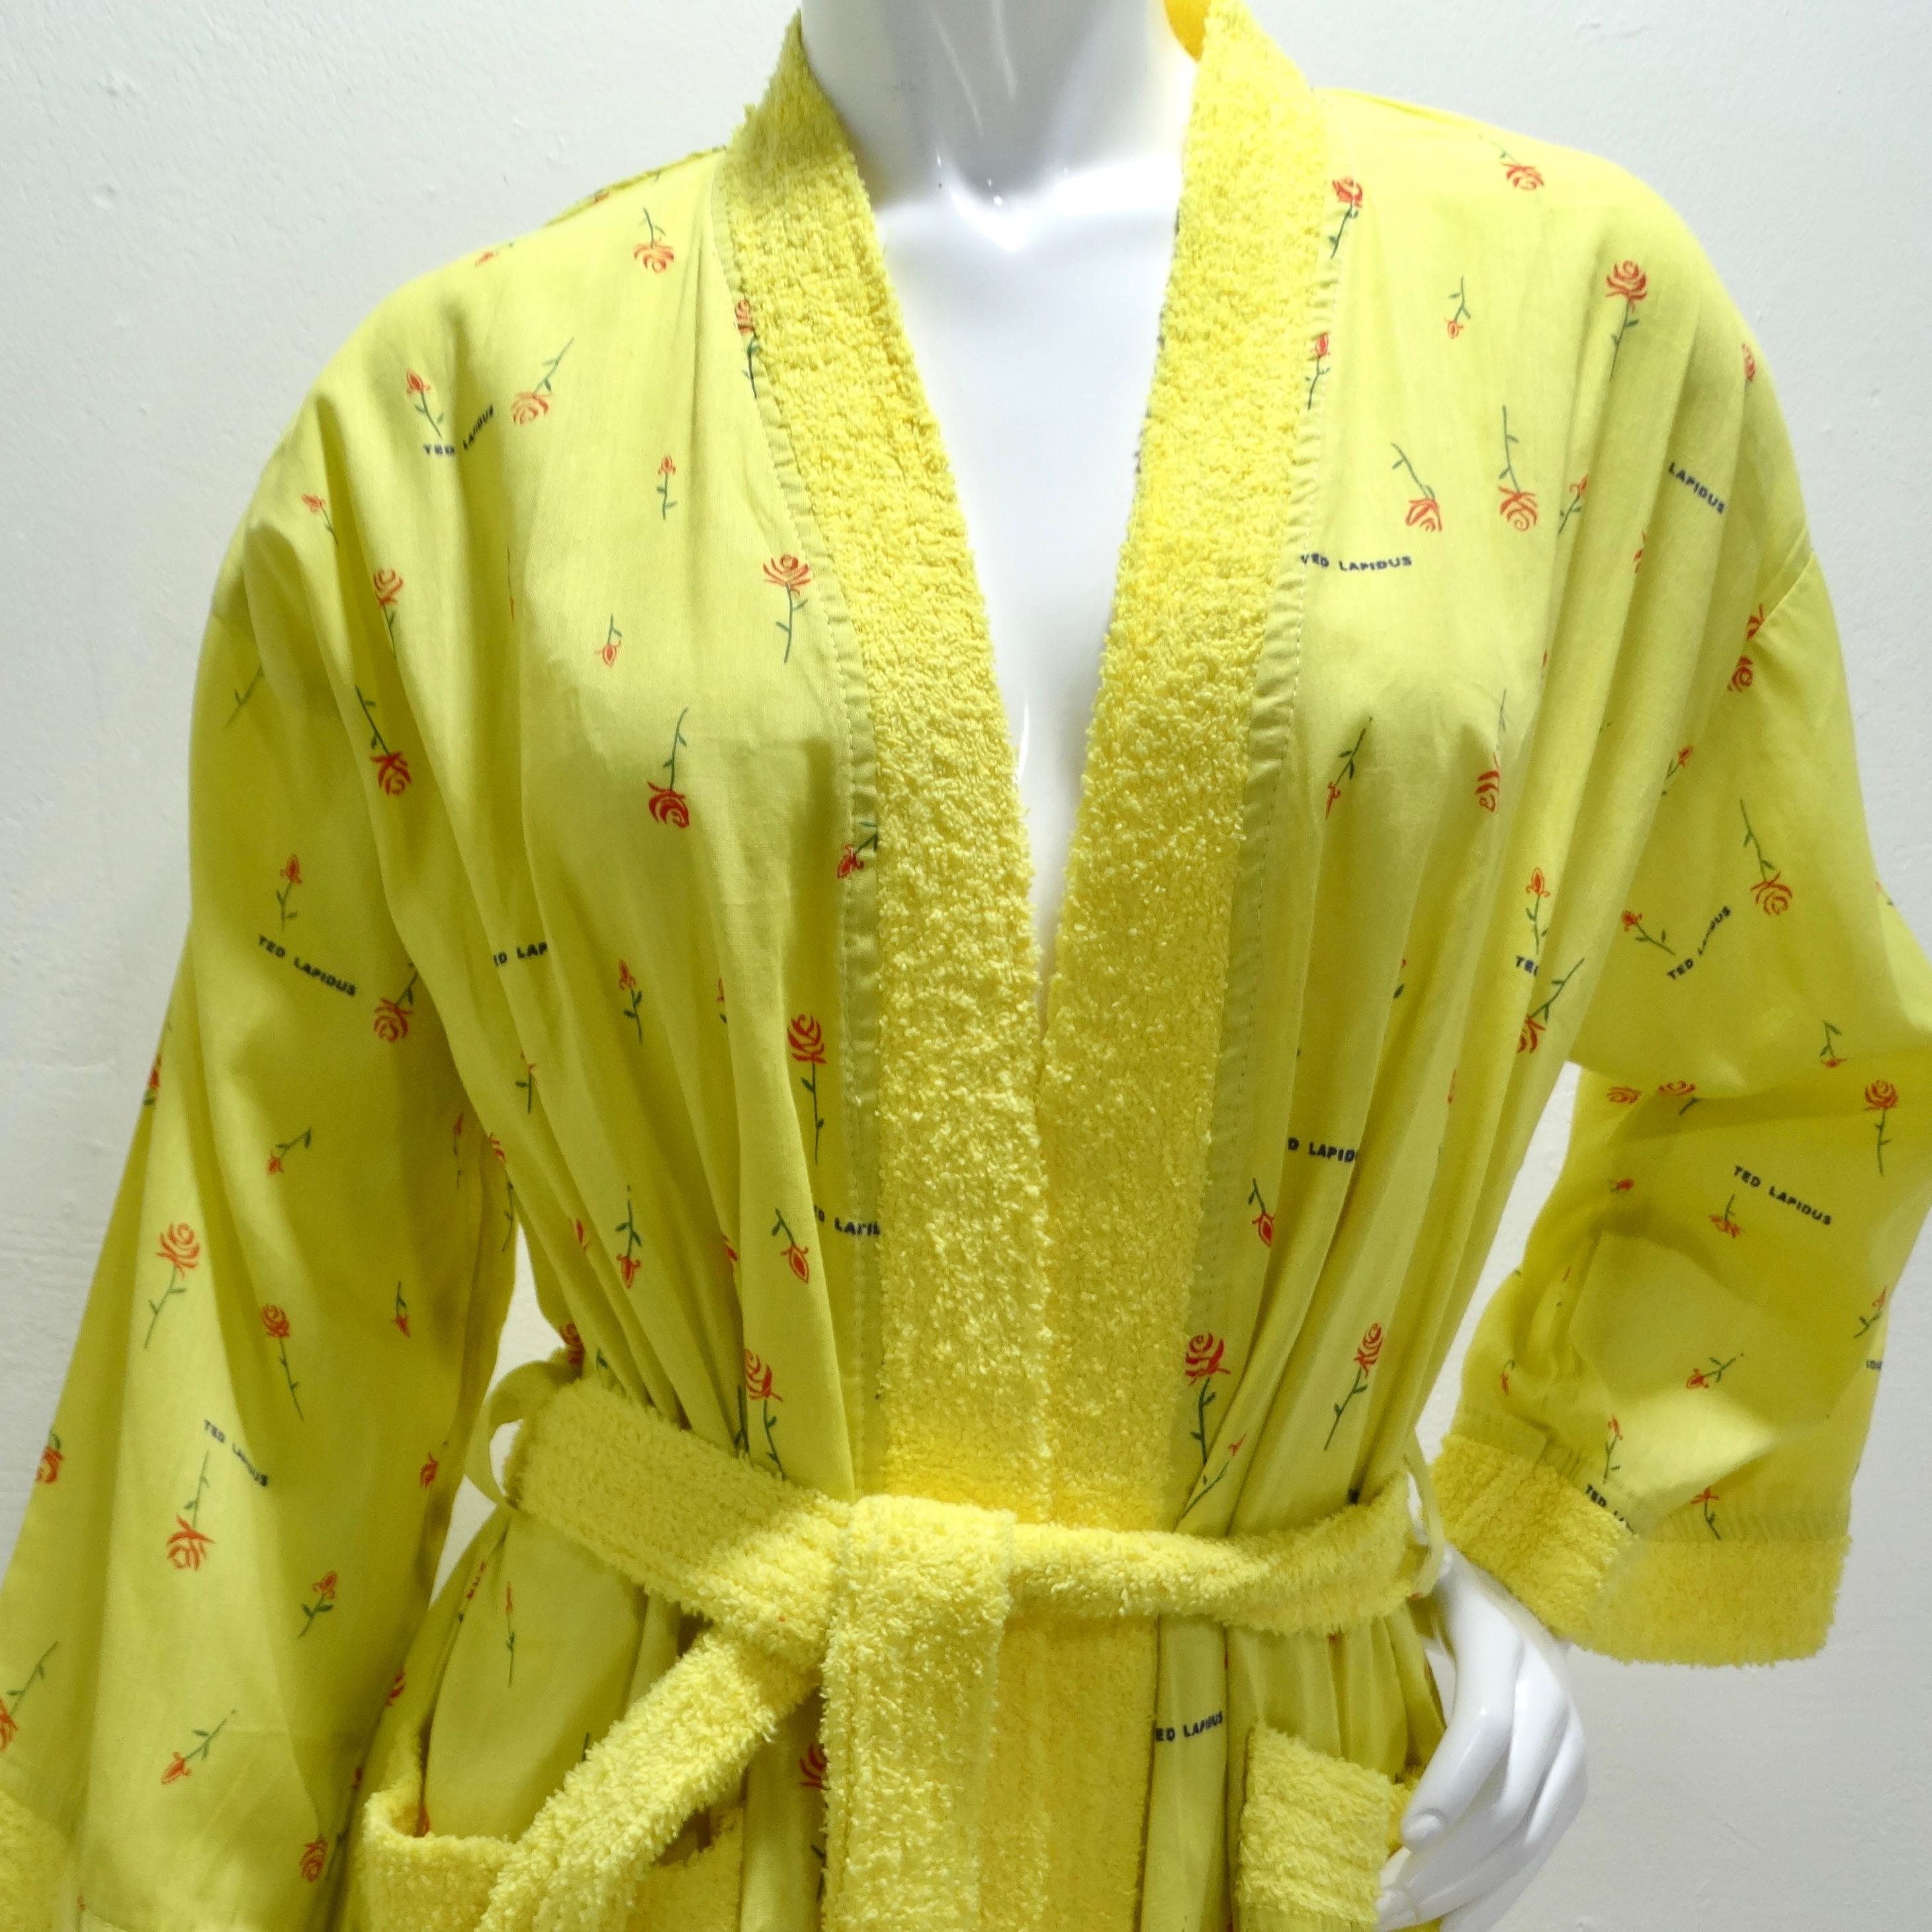 The Ted Lapidus 1980s Rose Print Robe sounds like a delightful and versatile addition to any wardrobe, with its vibrant yellow color and whimsical rose print.

The bright yellow hue of the robe adds a cheerful and sunny touch to any ensemble, making